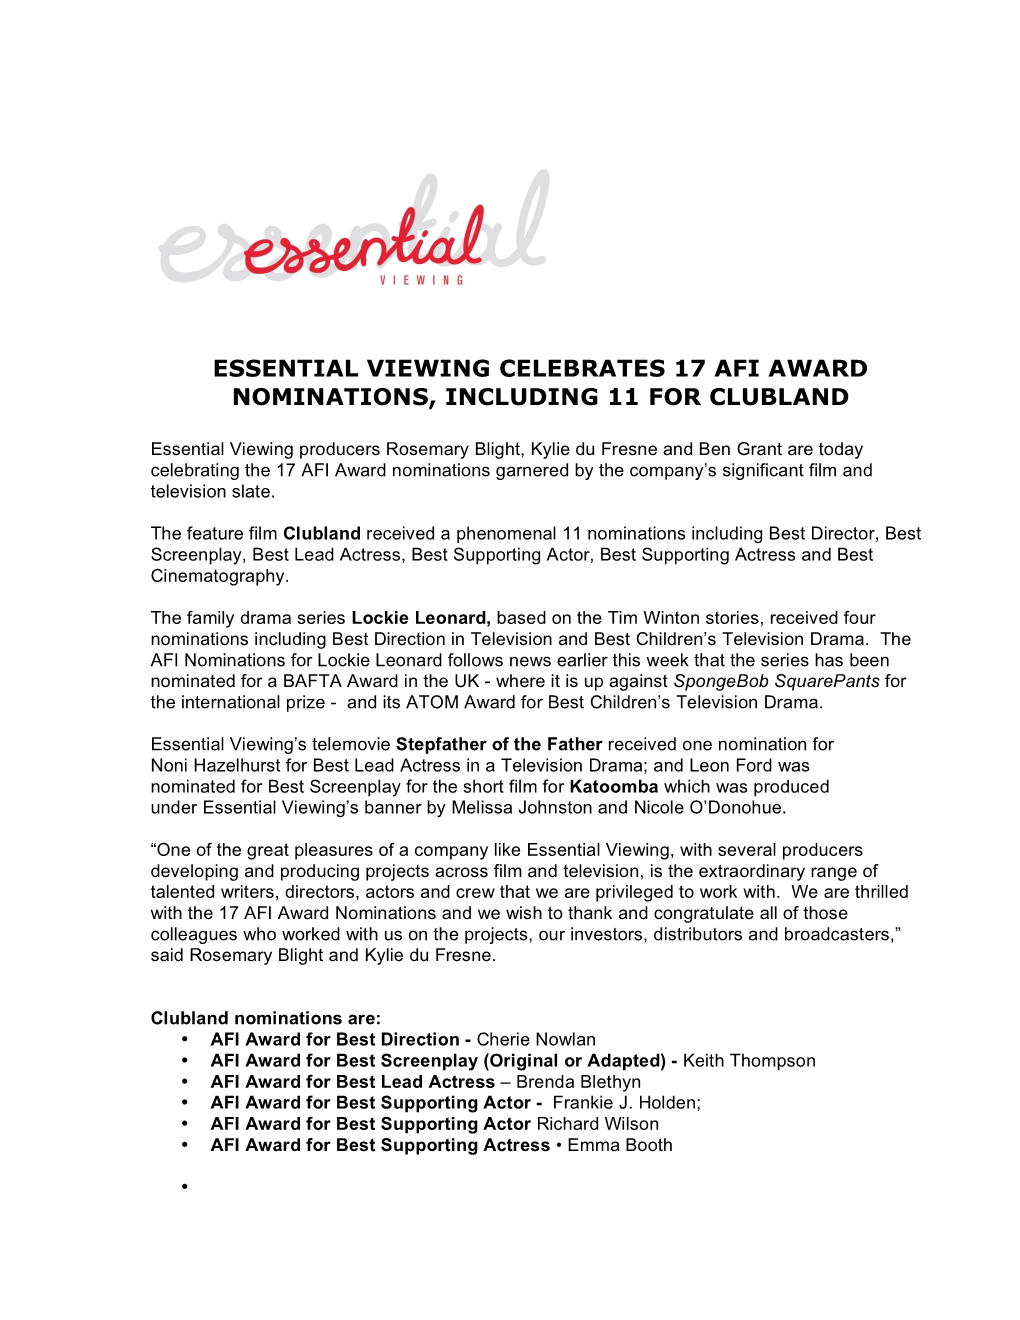 Essential Viewing Celebrates 17 Afi Award Nominations, Including 11 for Clubland